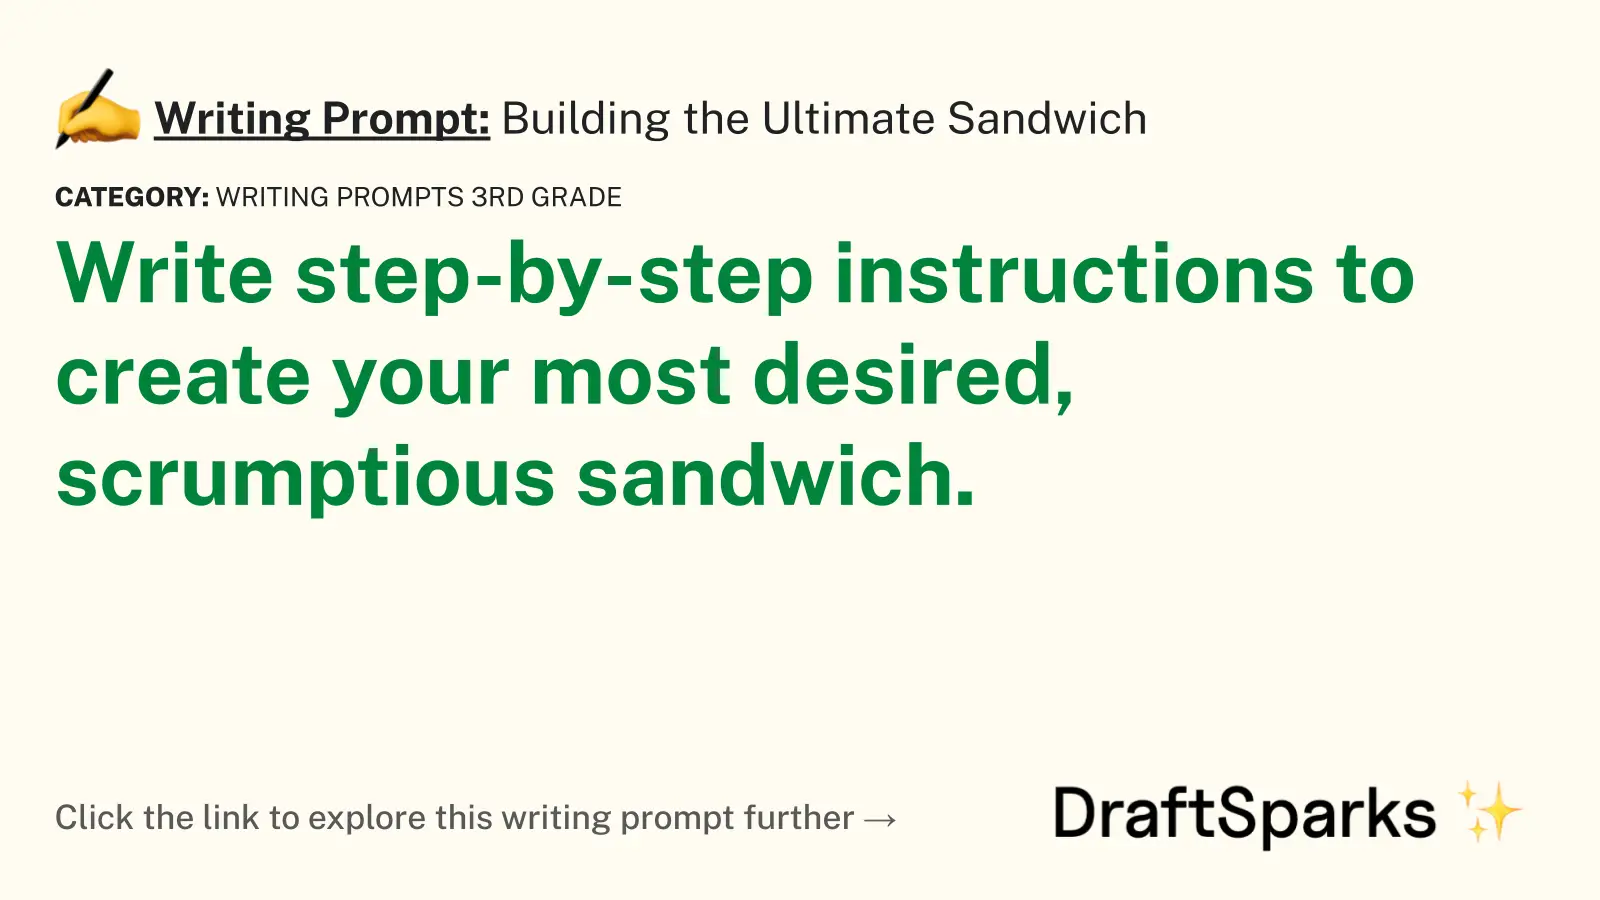 Building the Ultimate Sandwich